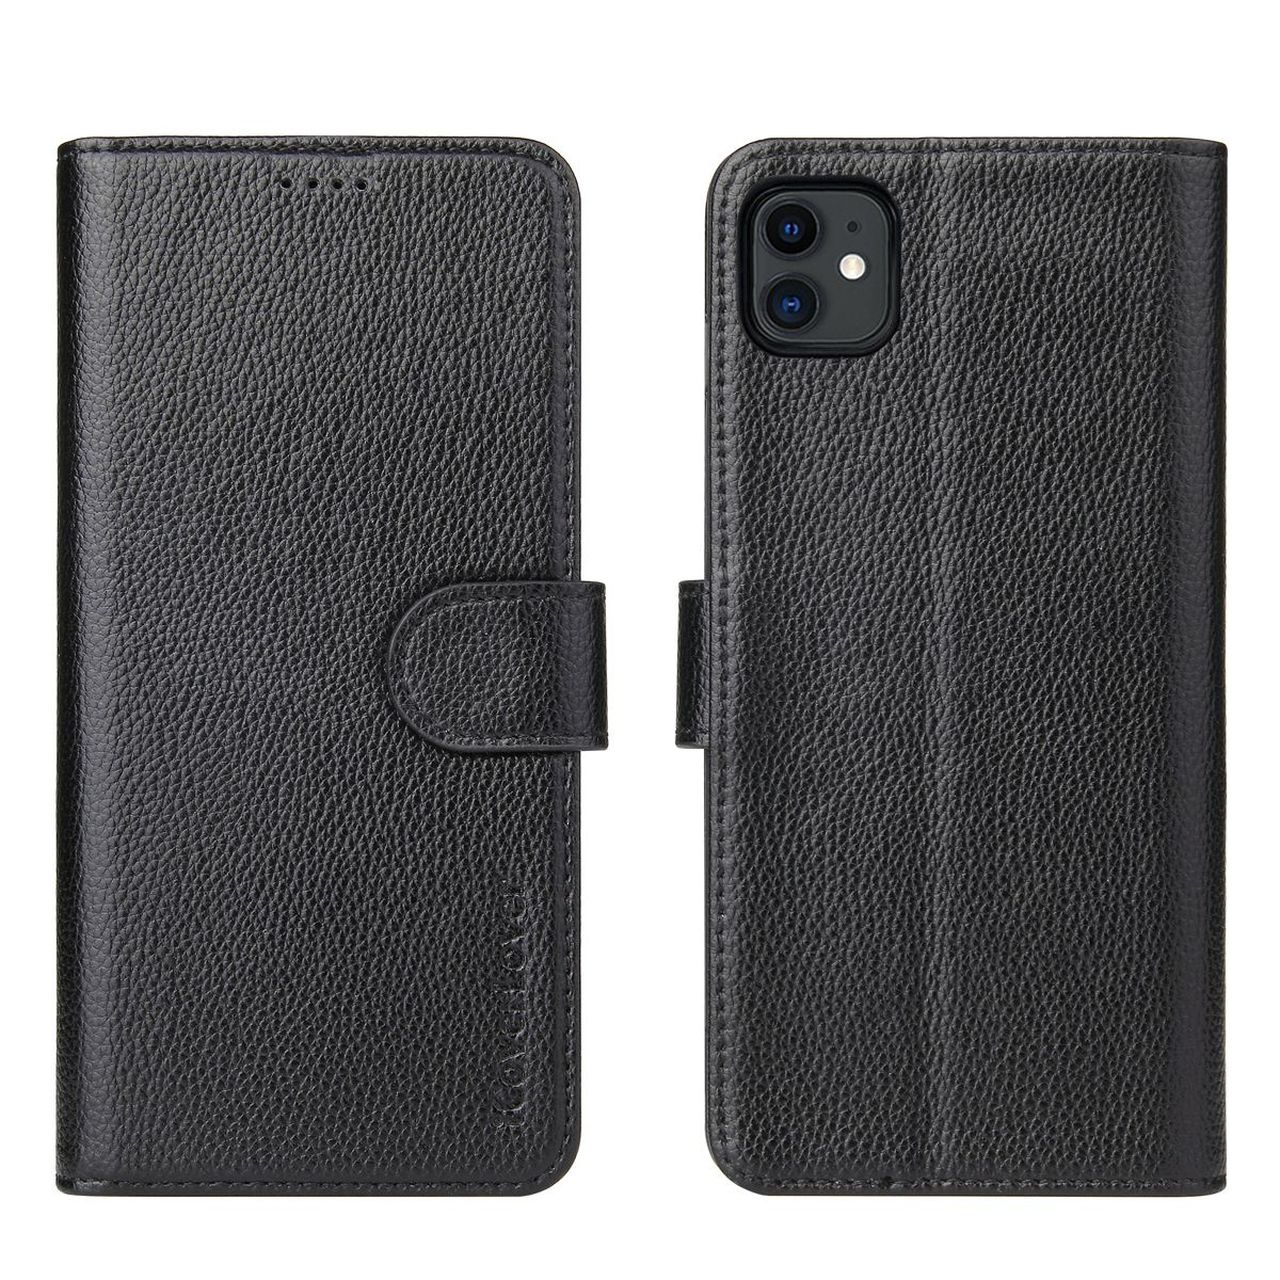 iPhone 11, 11 Pro & 11 Pro Max Case iCoverLover Genuine Cow Leather Protective Wallet Case